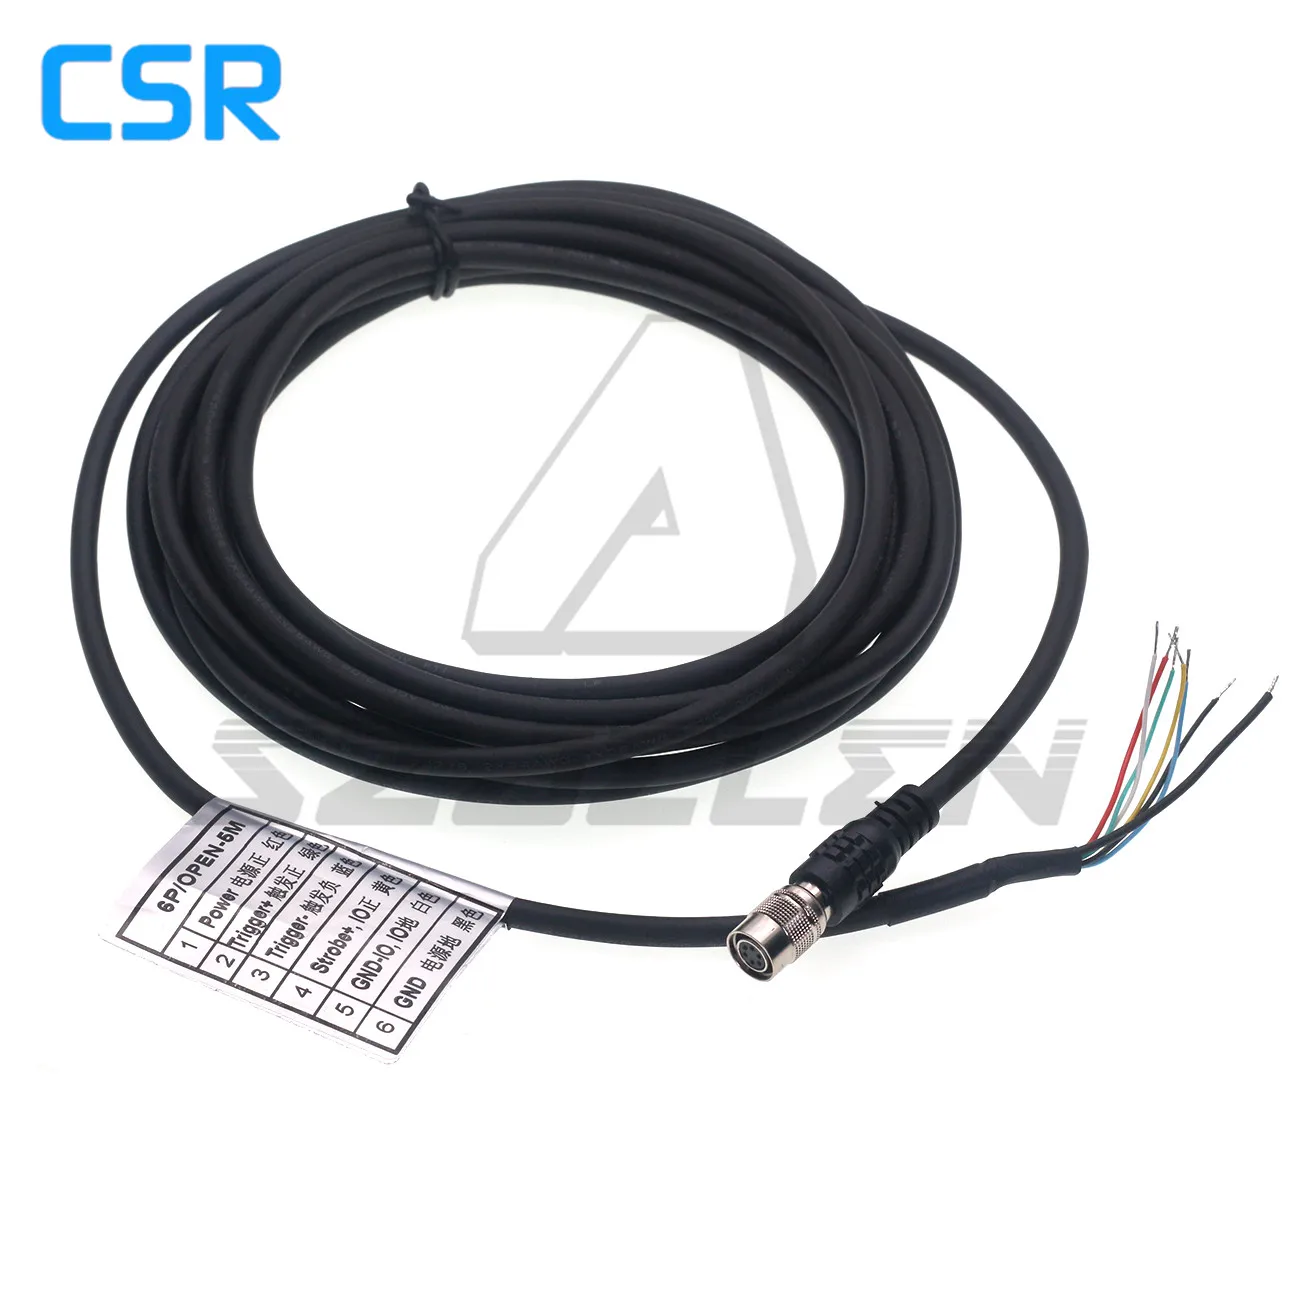 

Basler GIGE AVT Industrial Camera CCD Power Input/Output Trigger Cable Hirose 6-Pin Female HR10A-7P-6S Semi-finished 5M